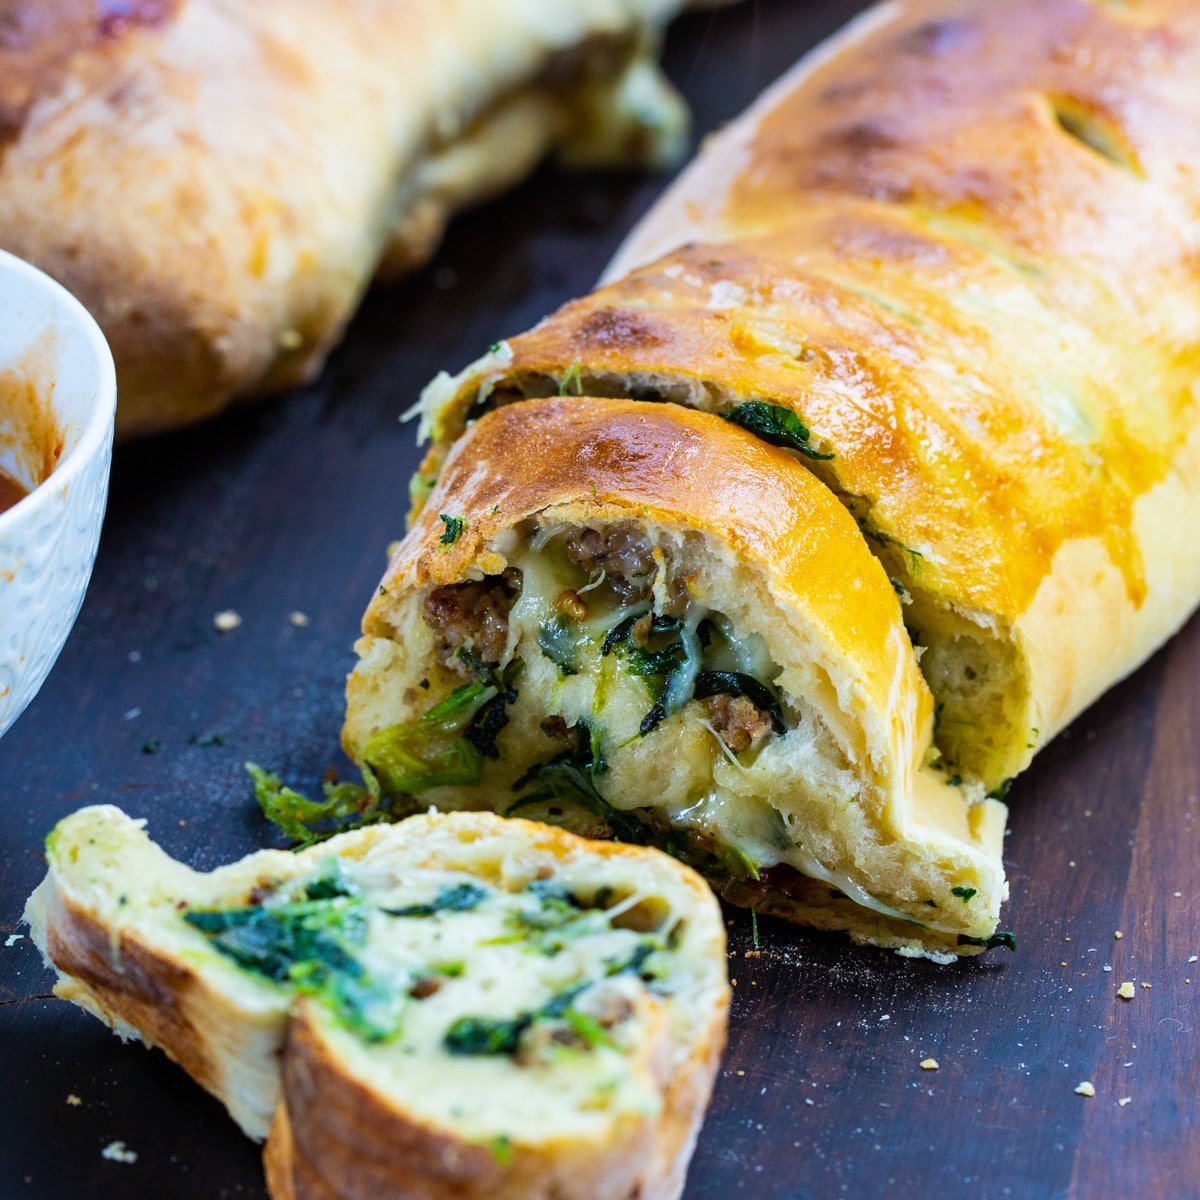 Sausage Spinach Bread with a couple of slices cut.